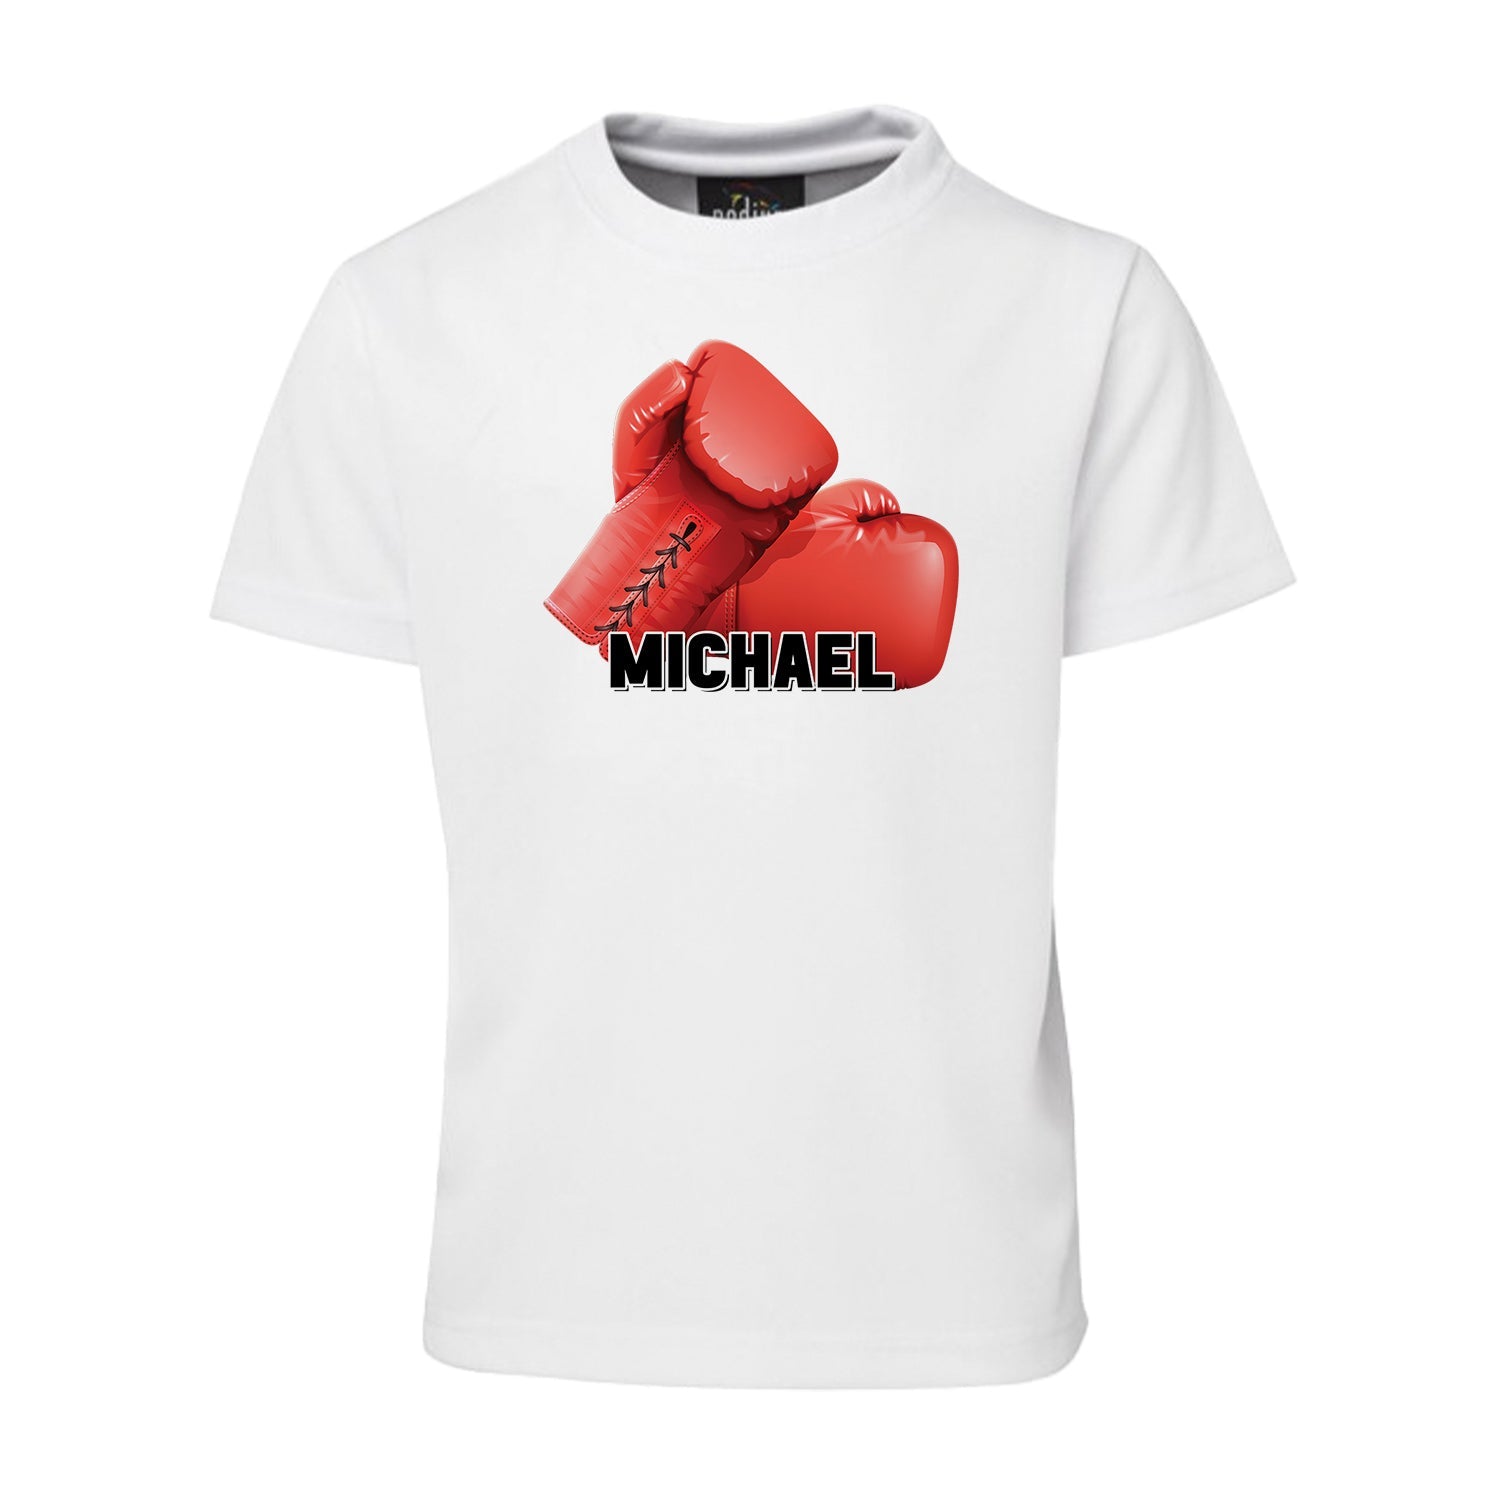 Boxing Themed Sublimation T-Shirt